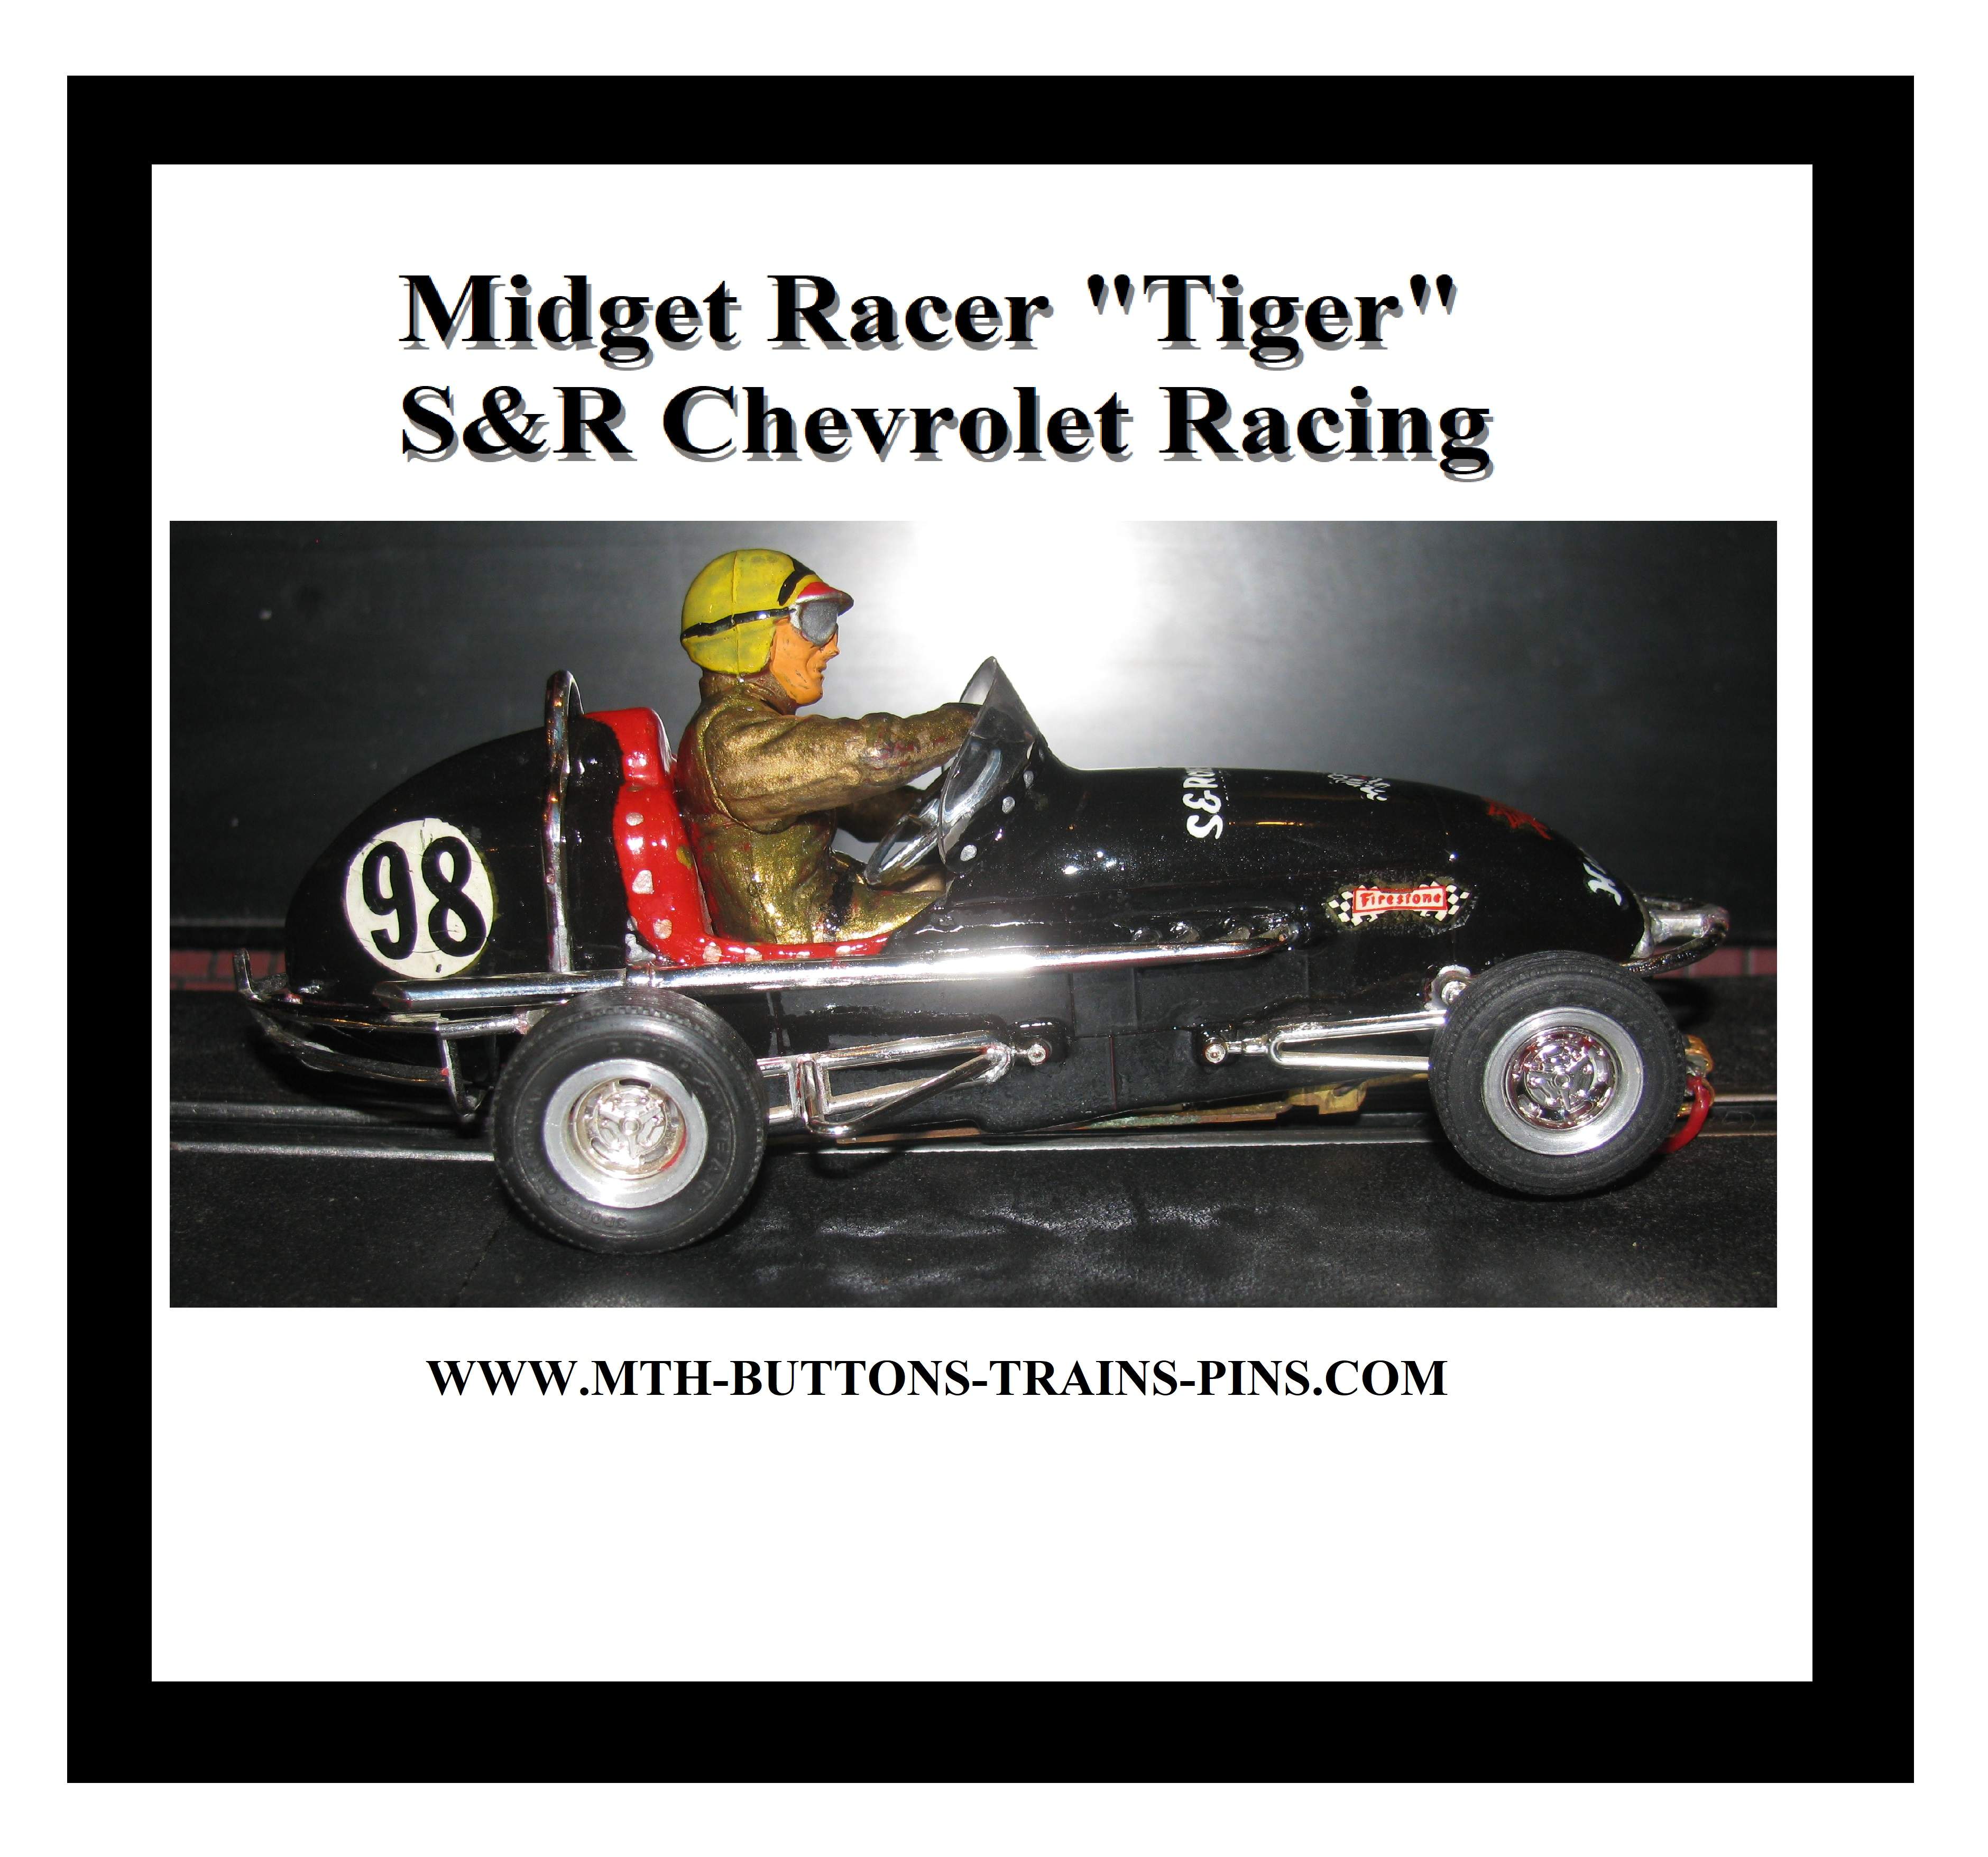 *SOLD* * SALE PRICE FOR CHARLES E. ONLY * Monogram Midget Racer “Tiger” Powered S&R Chevrolet Racing Special Slot Car 1:24 Scale 